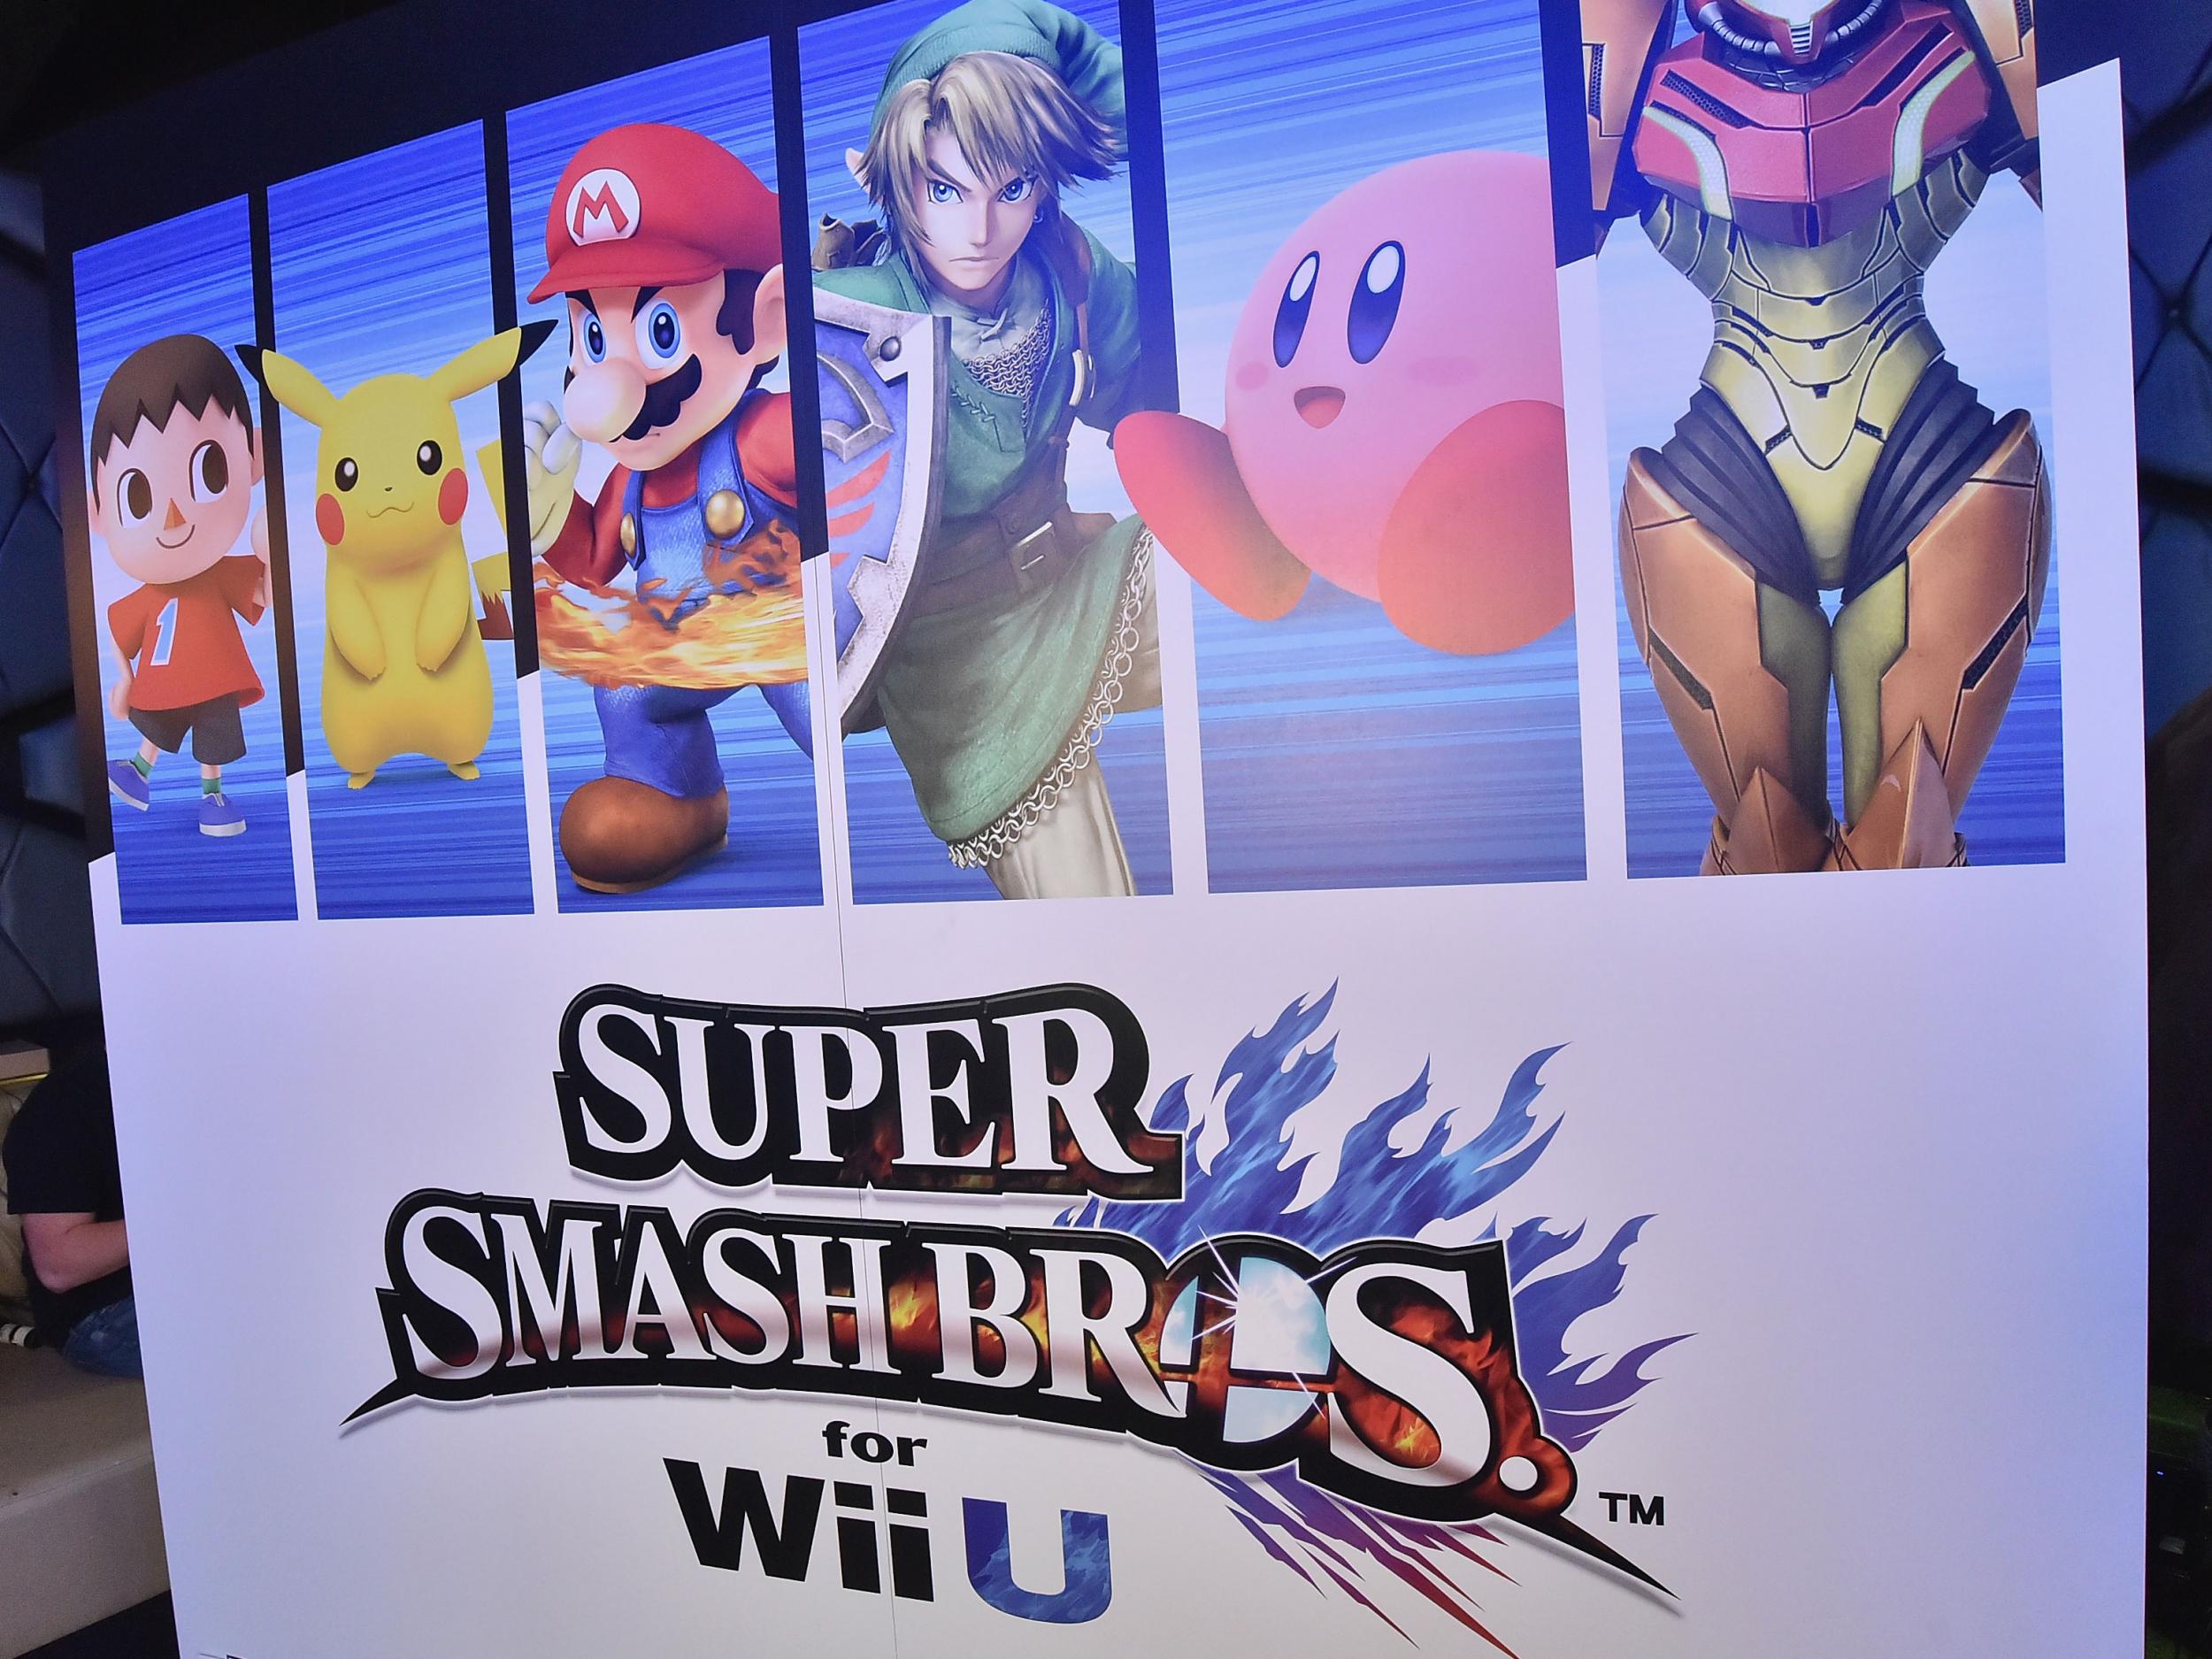 Nintendo NX Rumours suggest a new Super Smash Bros. game could arrive